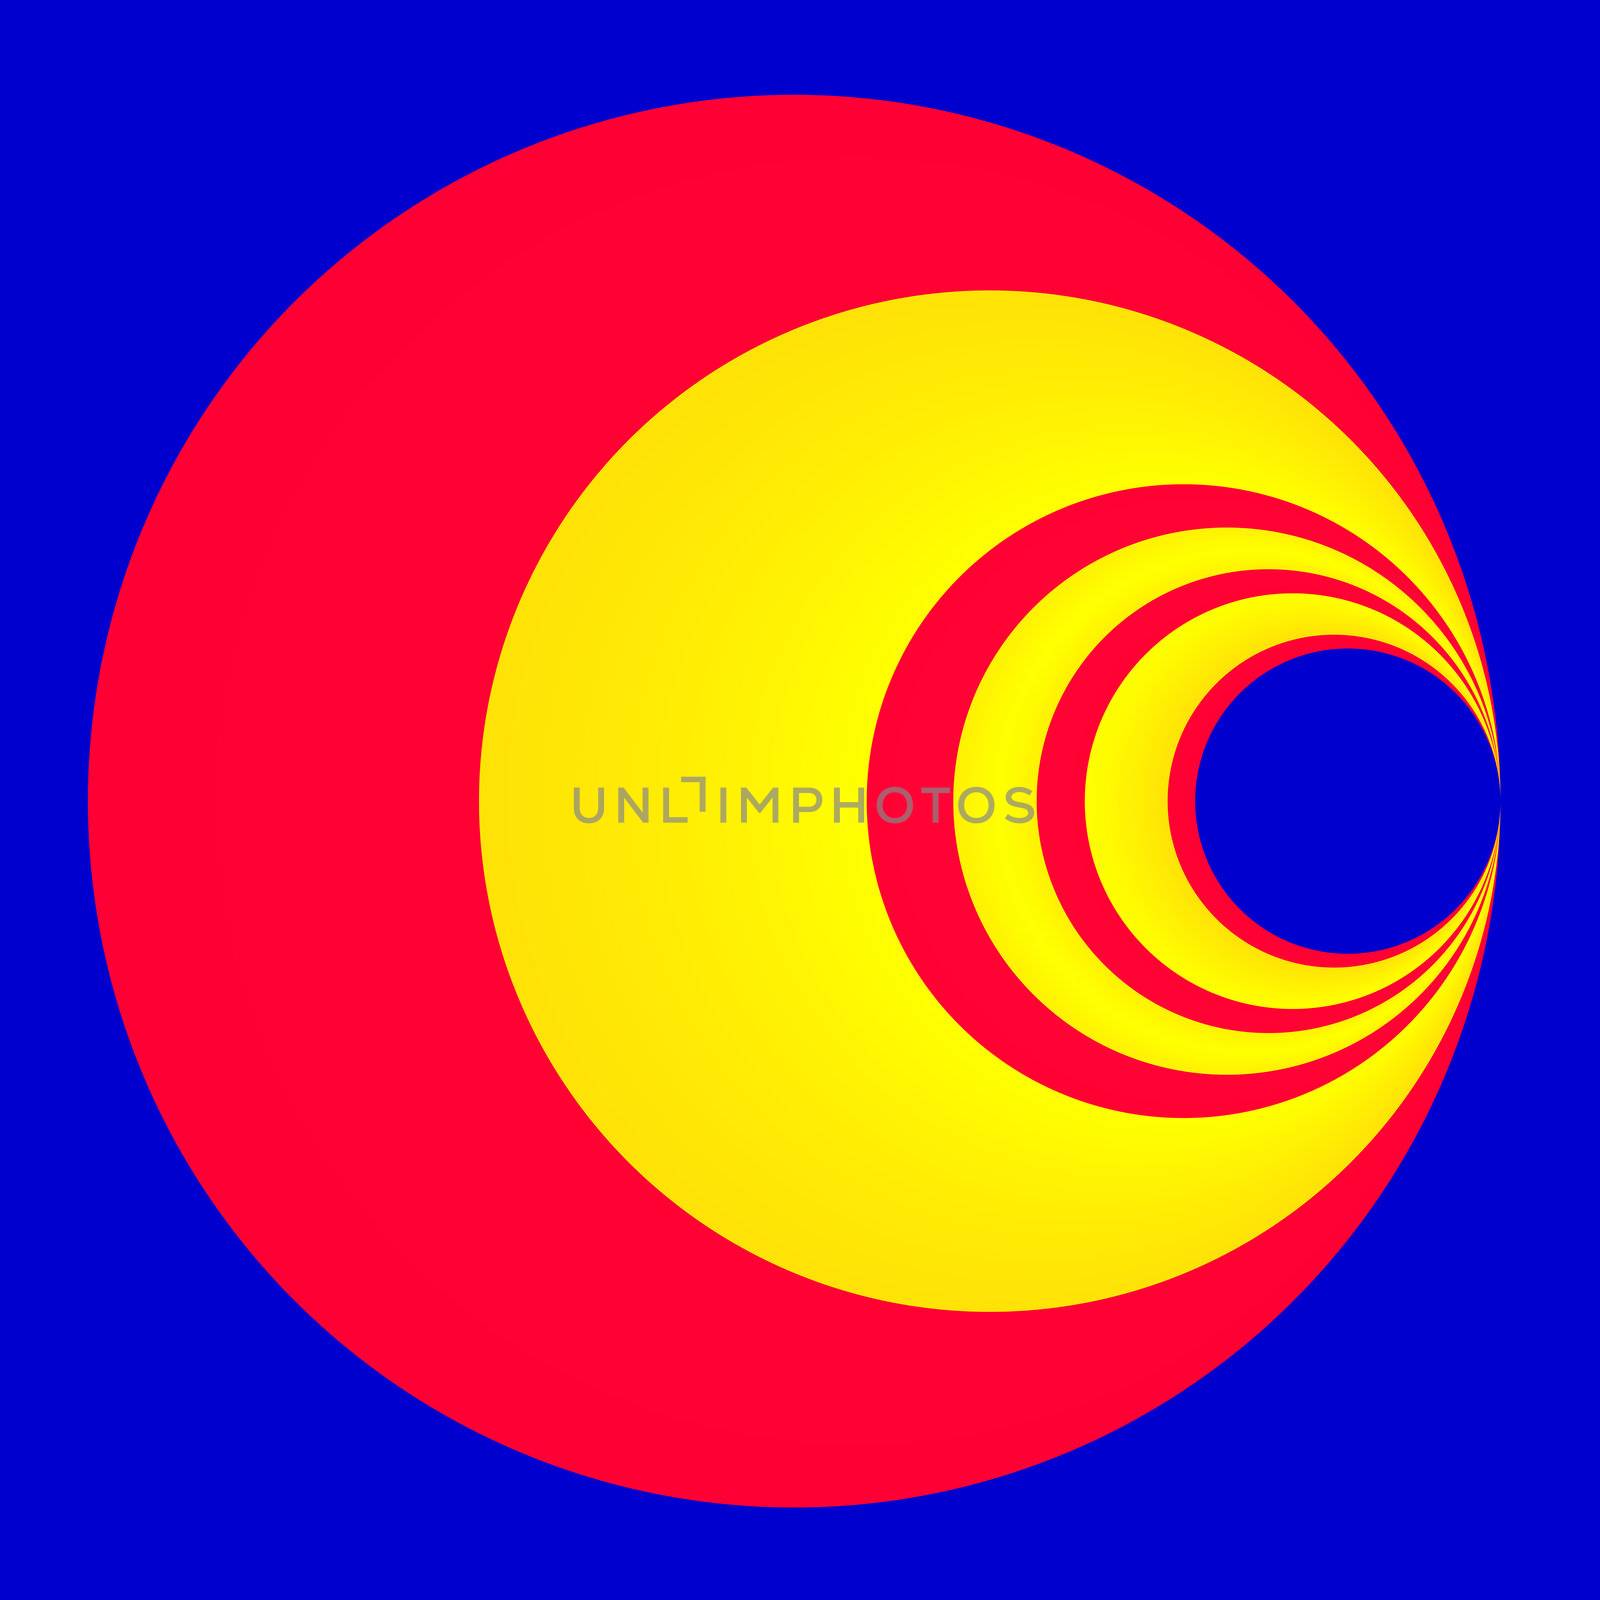 Red and Yellow Circles on a Blue Background by patballard